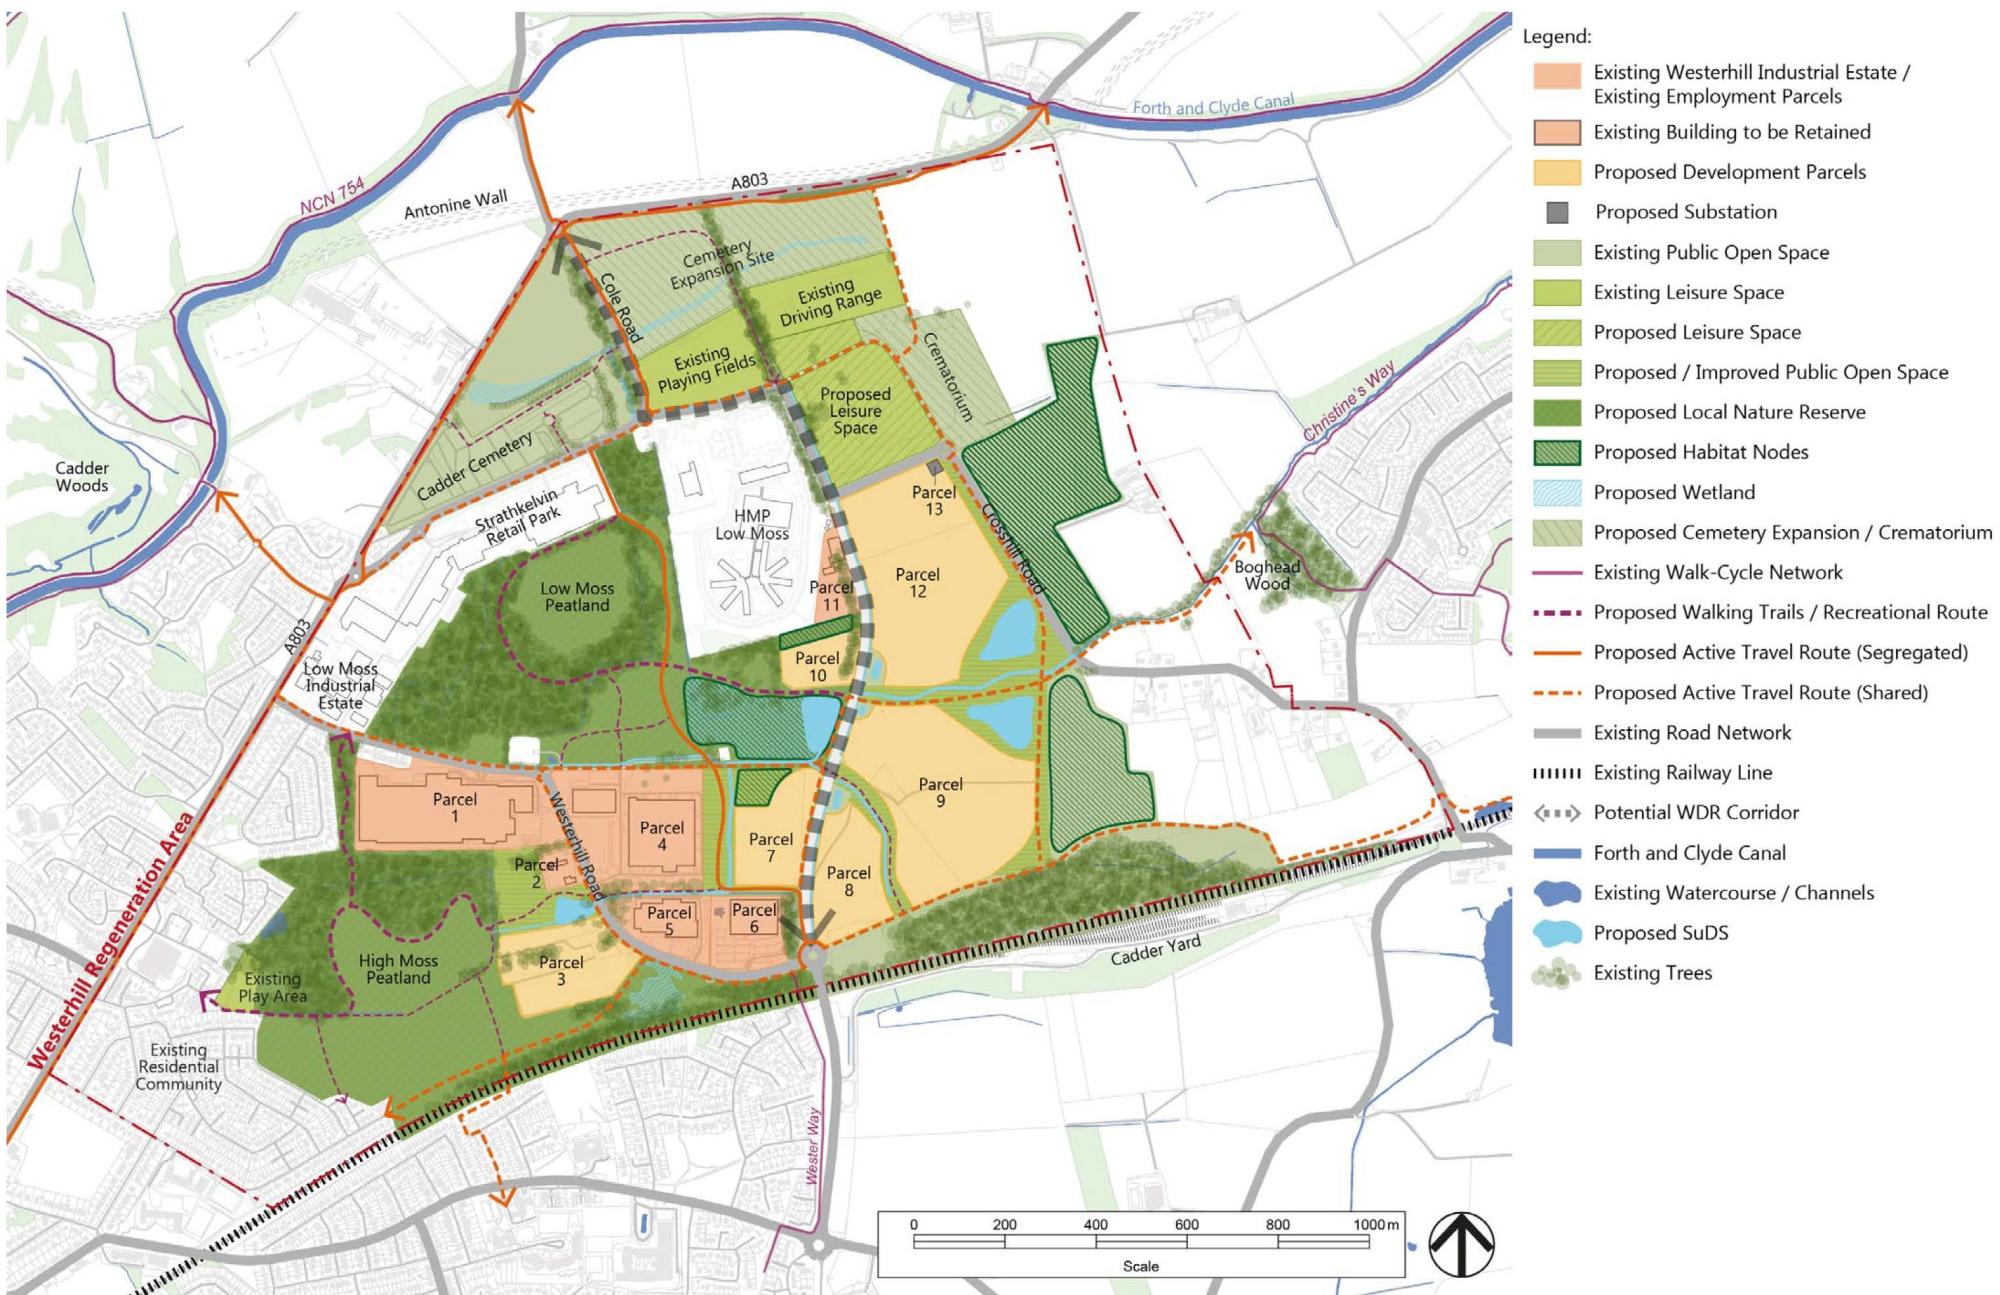 Map highlighting the following areas of westerhill - Existing Westerhill Industrial Estate / Existing Employment Parcels Existing Building to be Retained Proposed Development Parcels Proposed Substation Existing Public Open Space Existing Leisure Space Proposed Leisure Space Proposed / Improved Public Open Space Proposed Local Nature Reserve Proposed Habitat Nodes Proposed Wetland Proposed Cemetery Expansion / Crematorium Existing Walk-Cycle Network Proposed Walking Trails / Recreational Route Proposed Active Travel Route (Segregated) Proposed Active Travel Route (Shared) Existing Road Network IIIIIII Existing Railway Line < Potential WDR Corridor Forth and Clyde Canal Existing Watercourse / Channels Proposed SUDS Existing Trees